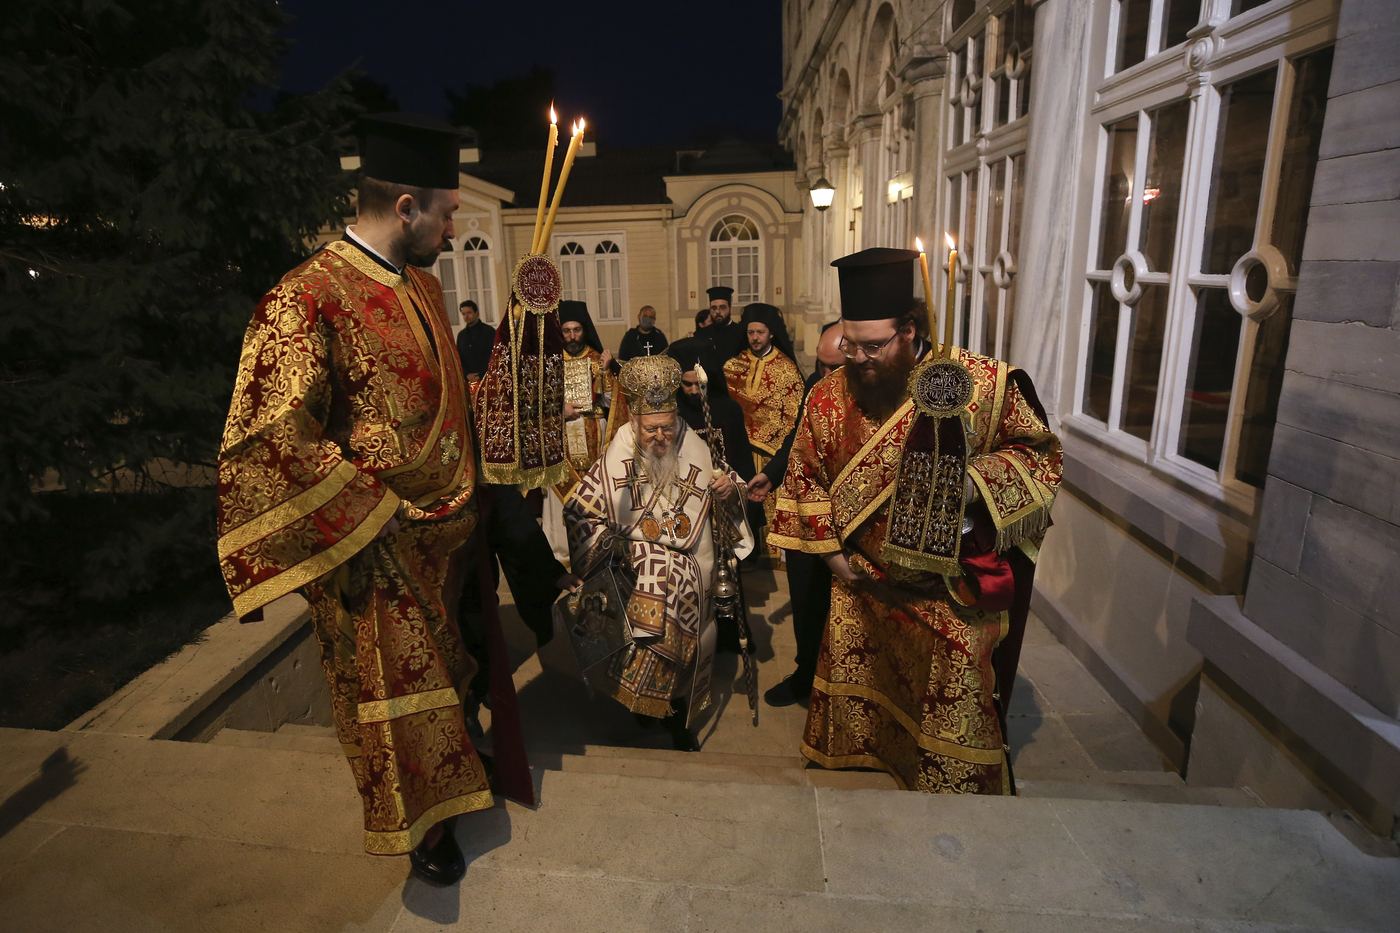 Ecumenical Patriarch Bartholomew I, the spiritual leader of the world's Orthodox Christians leads the Good Friday procession of the Epitaphios  during Orthodox Easter Week services, held without worshippers to help contain the spread of coronavirus at the Patriarchal Church of St. George in Istanbul, Friday, April 17, 2020.For Orthodox Christians, this is normally a time of reflection and joy, of centuries-old ceremonies steeped in symbolism and tradition. But this year, Easter, by far the most significant religious holiday for the world's roughly 300 million Orthodox, has essentially been cancelled in a world locked down by the COVID-19 pandemic. (AP Photo/Emrah Gurel, Pool)